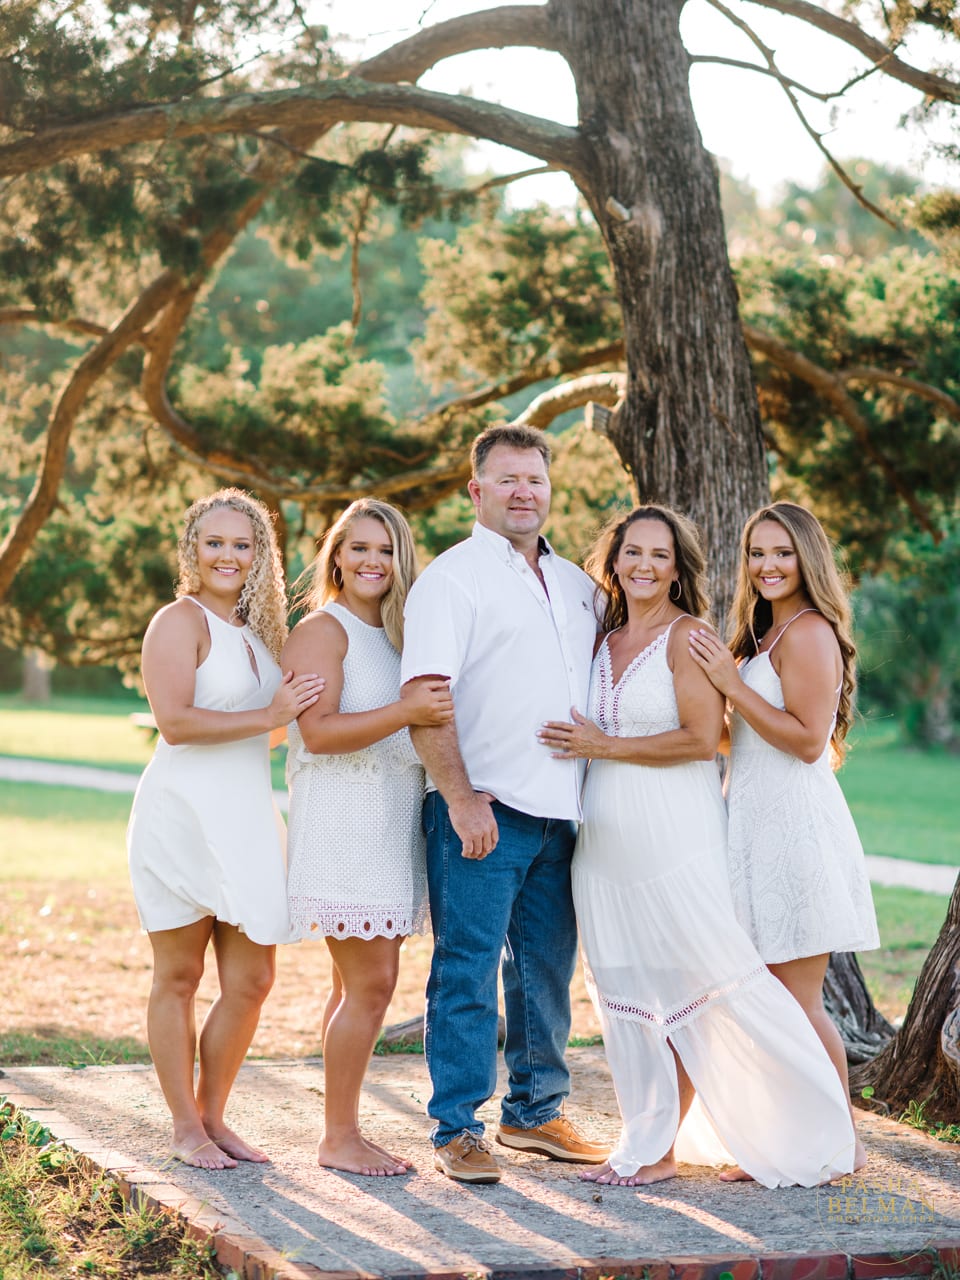 Family Pictures - Family Poses - Myrtle Beach - Garden City - Pawleys Island - Family Photography